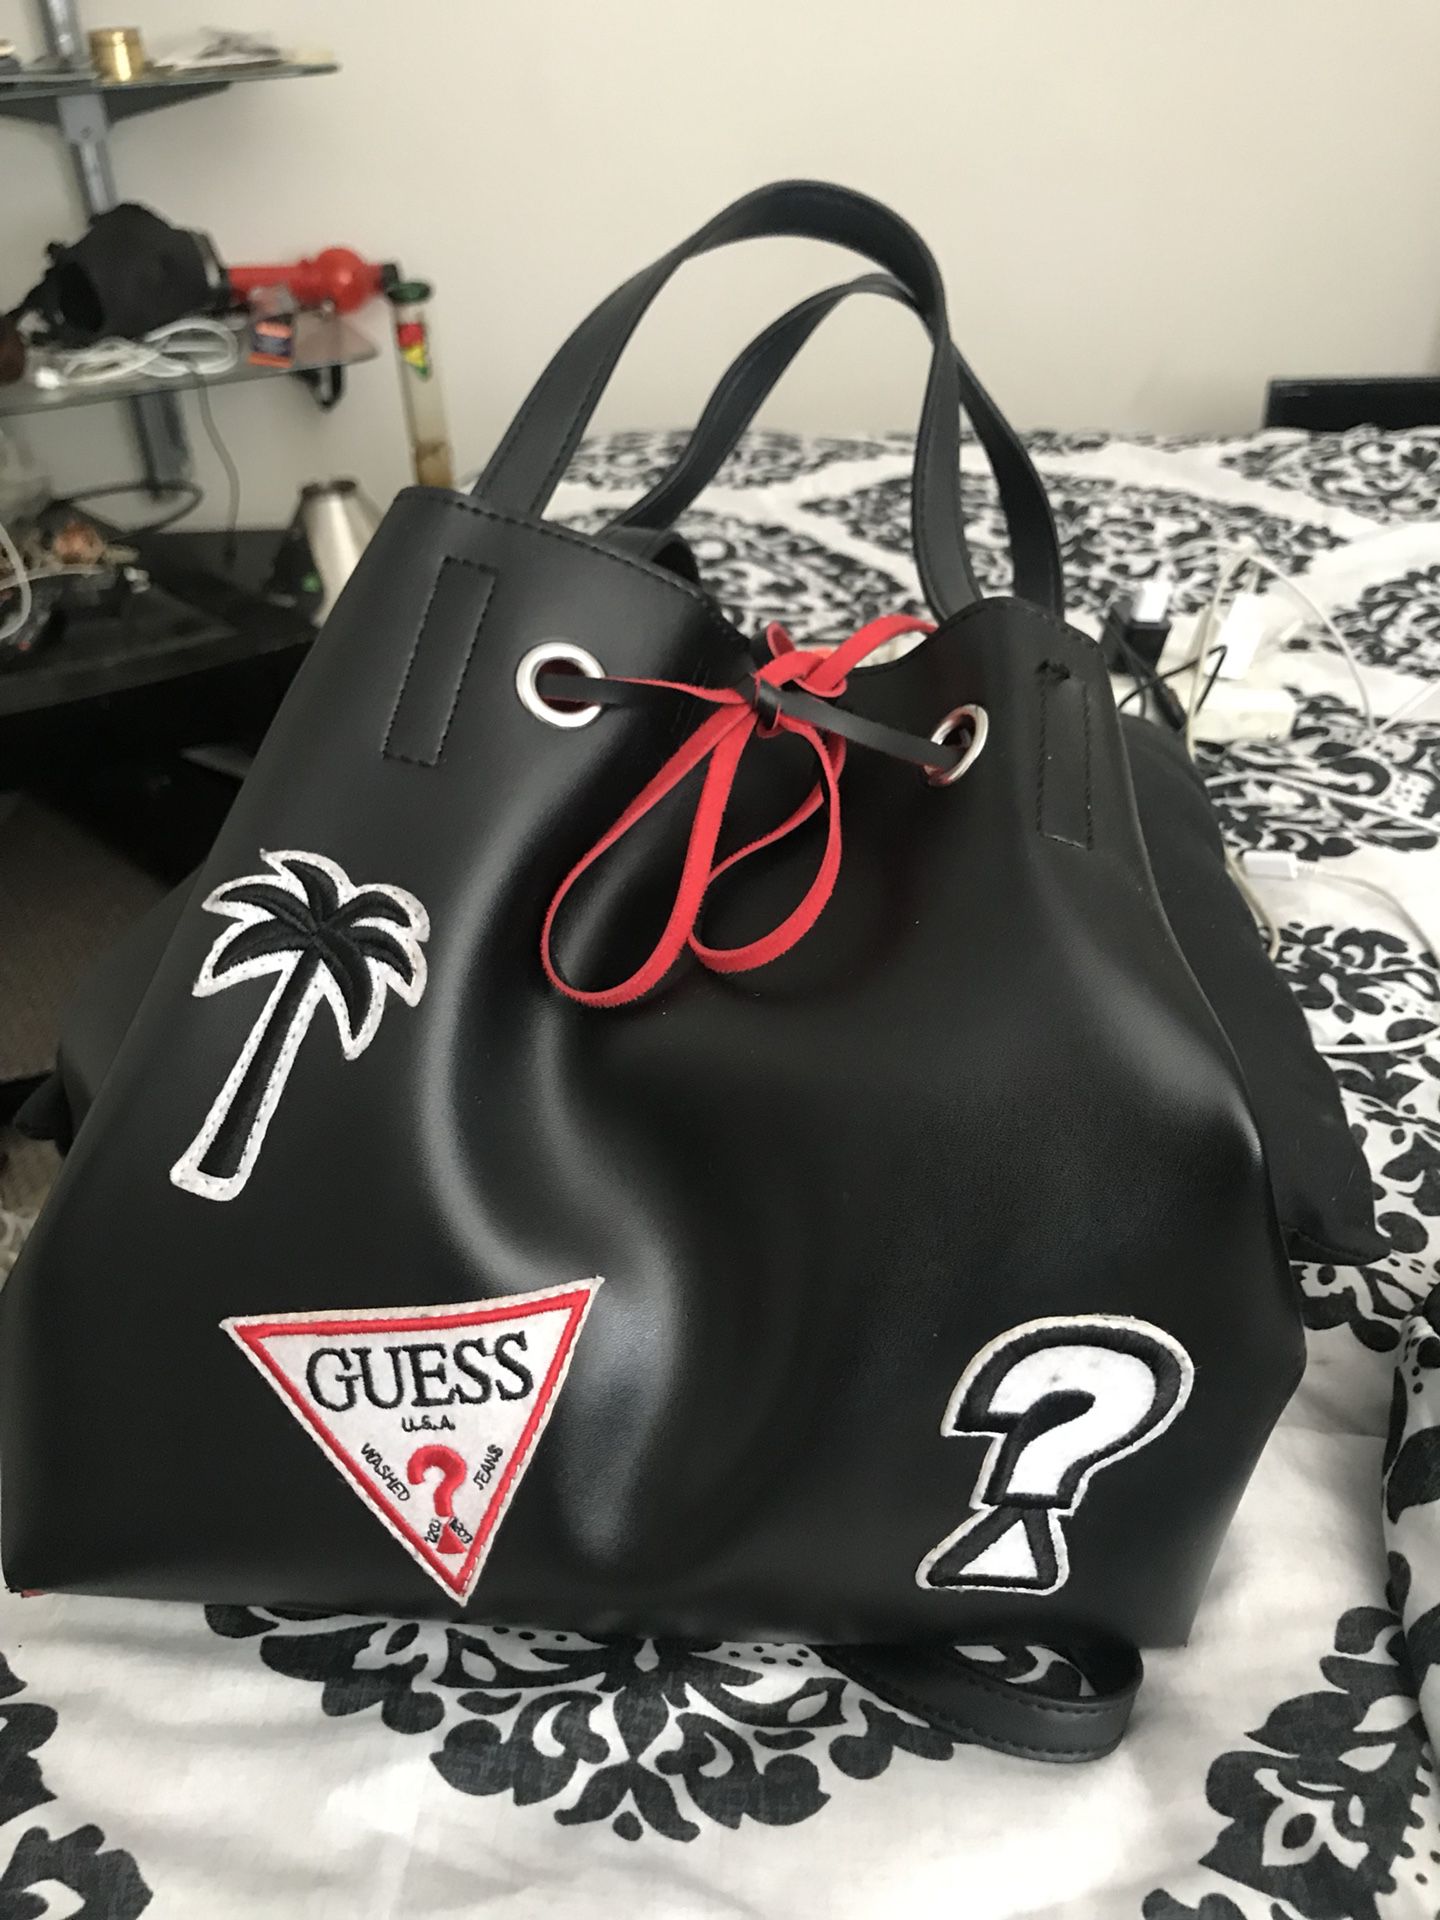 Official black and red woman’s Guess bag!